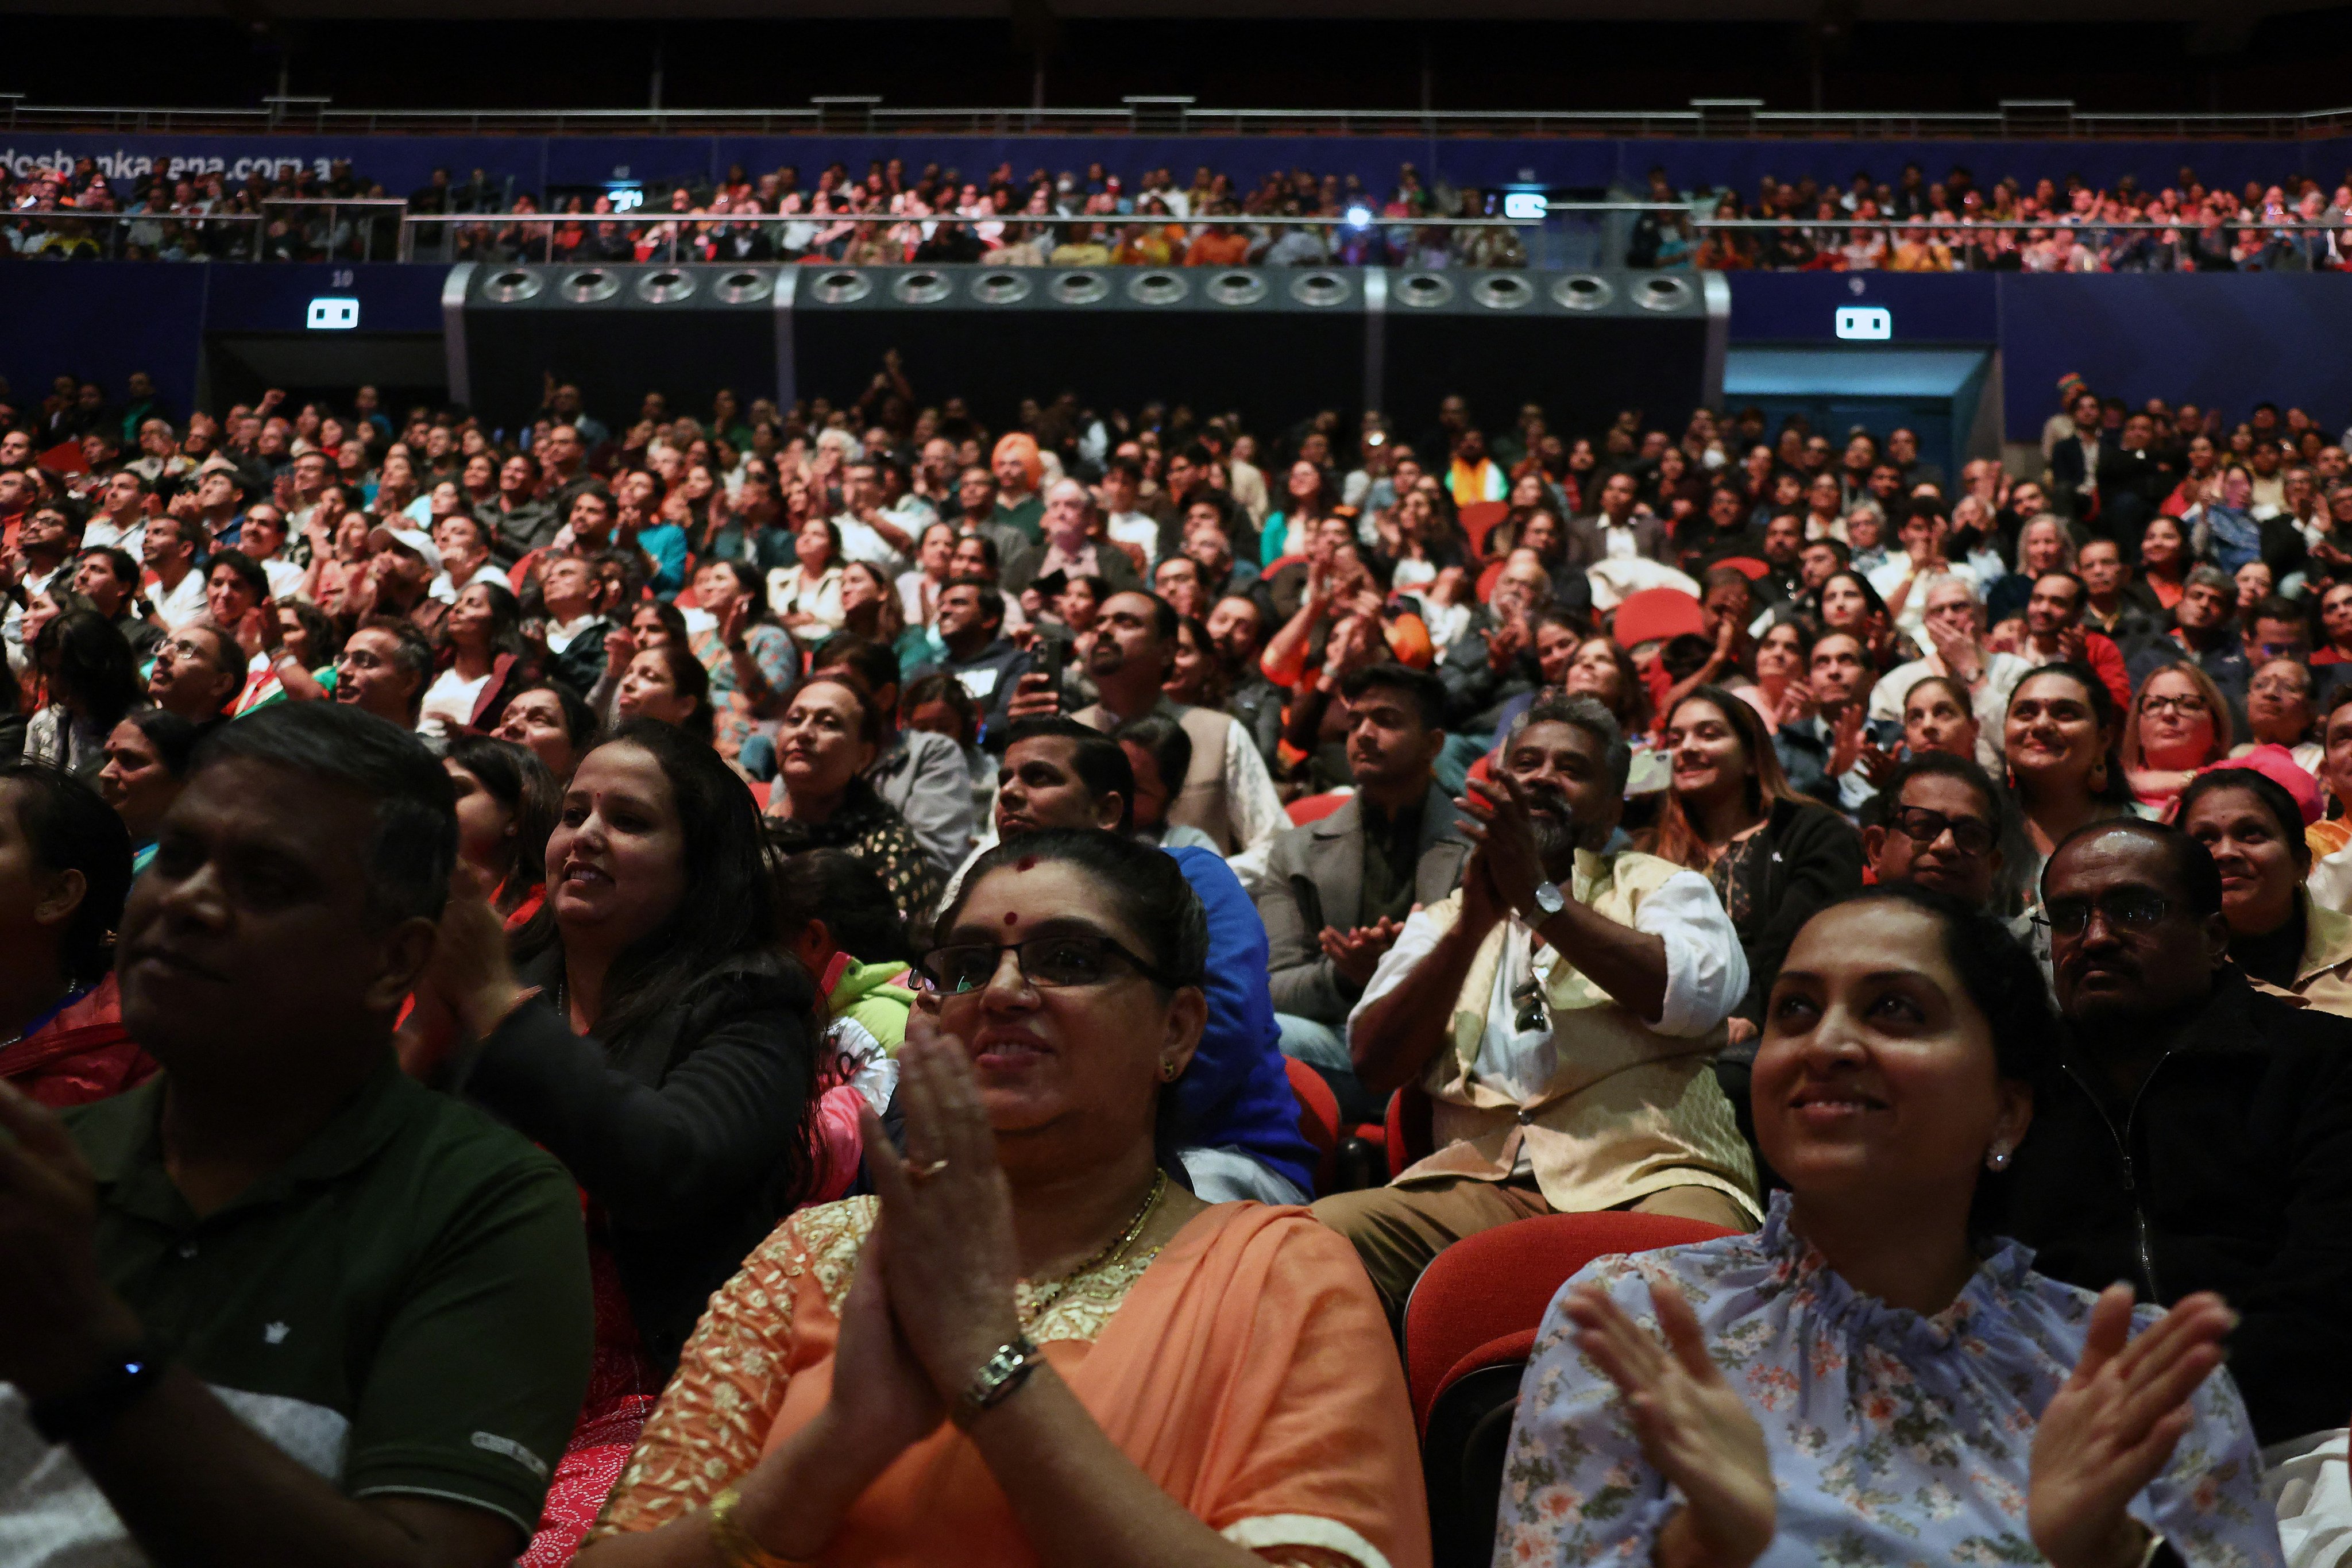 Indian-Australians listen to a speech in Sydney last year by Indian Prime Minister Narendra Modi. A recent survey revealed significant under-representation of the Indian diaspora in Australian politics and leadership roles. Photo: AFP